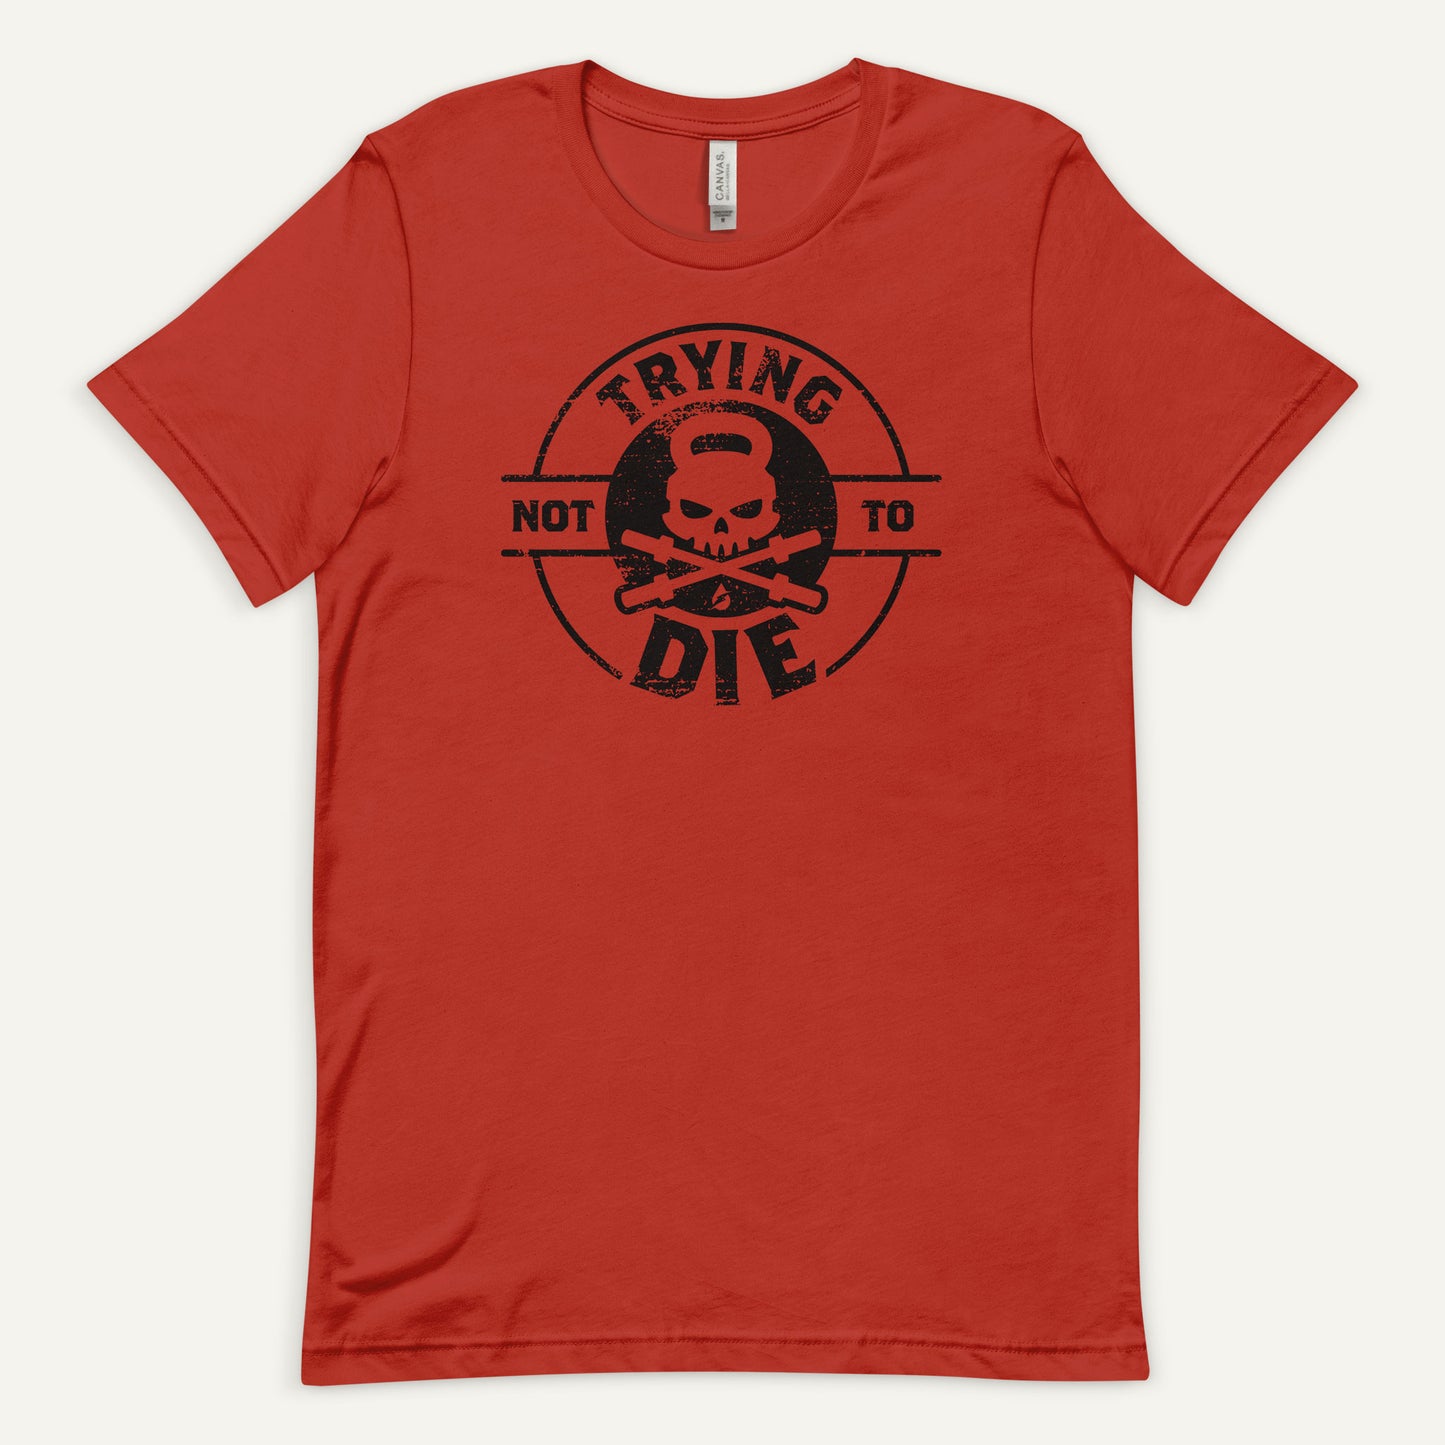 Trying Not To Die Men's Standard T-Shirt